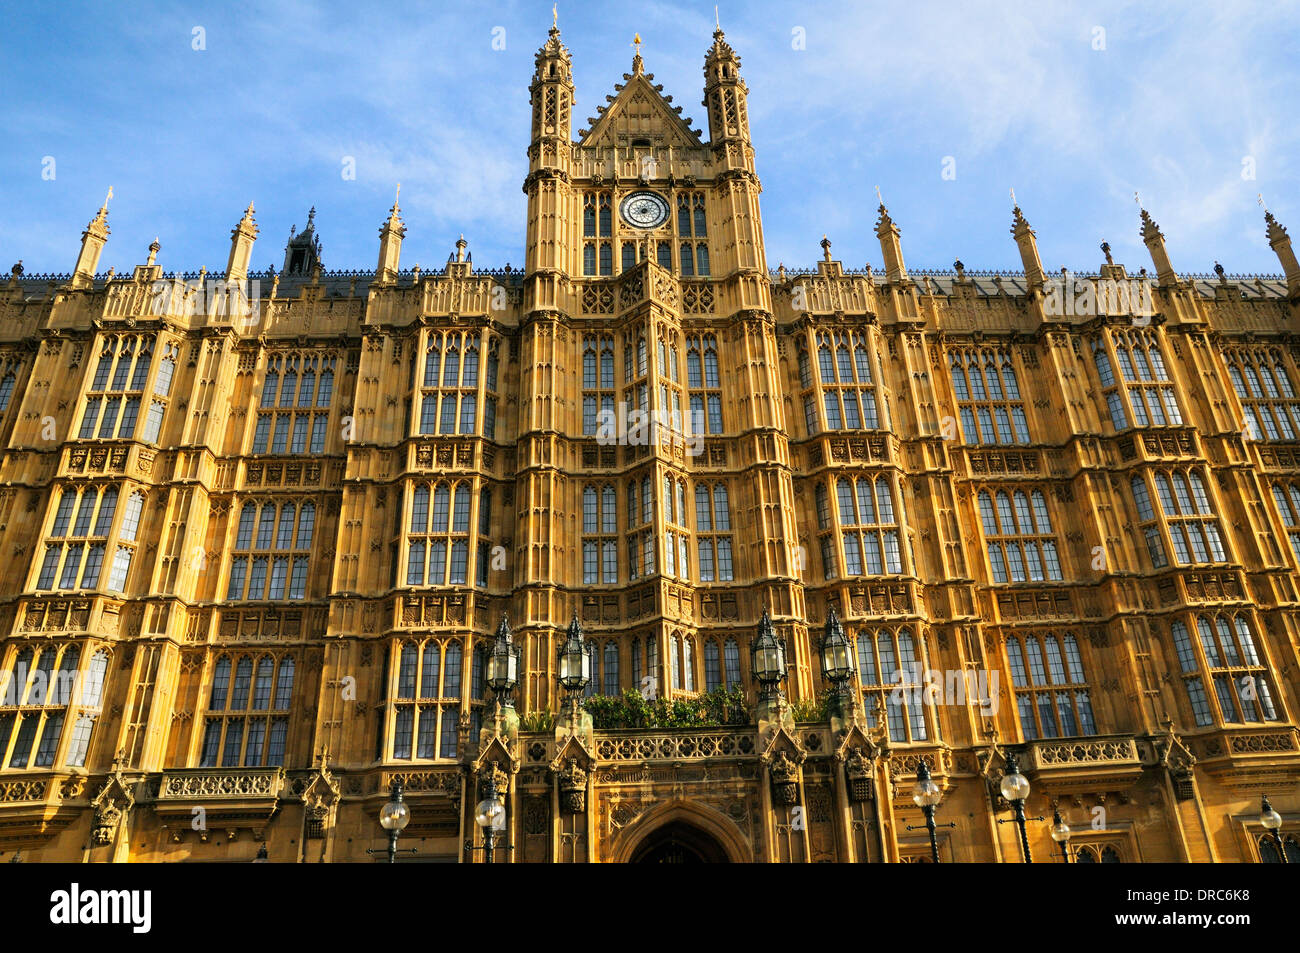 L'esterno dell'entrata dei coetanei delle Houses of Lords da Old Palace Yard, Palace of Westminster, City of Westminster, Londra, Inghilterra, REGNO UNITO Foto Stock